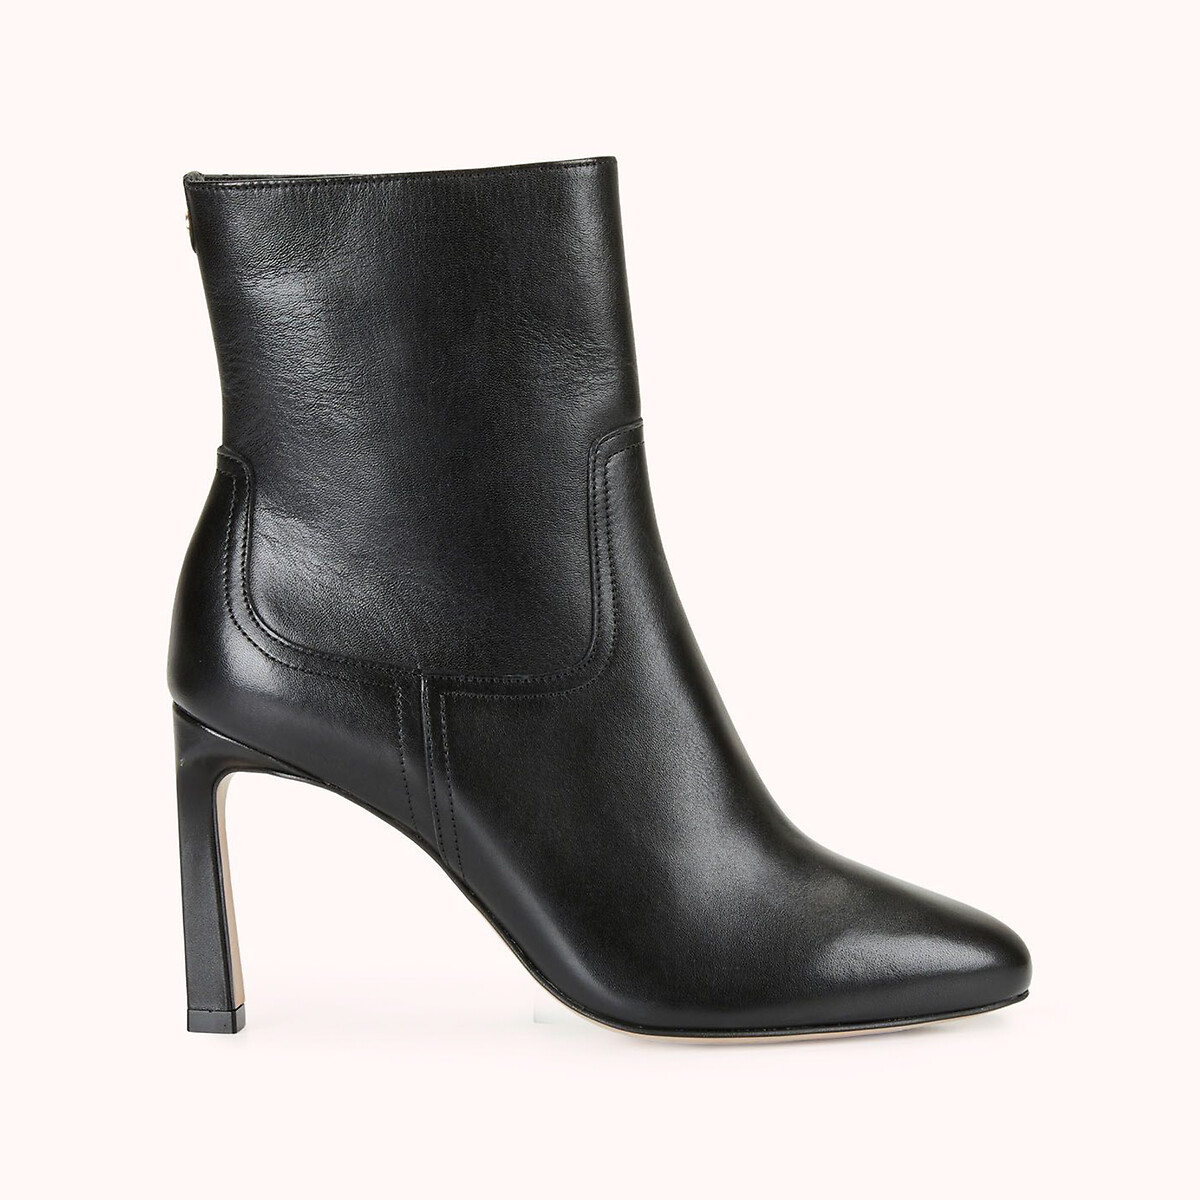 Zonna Leather Ankle Boots with Stiletto Heel